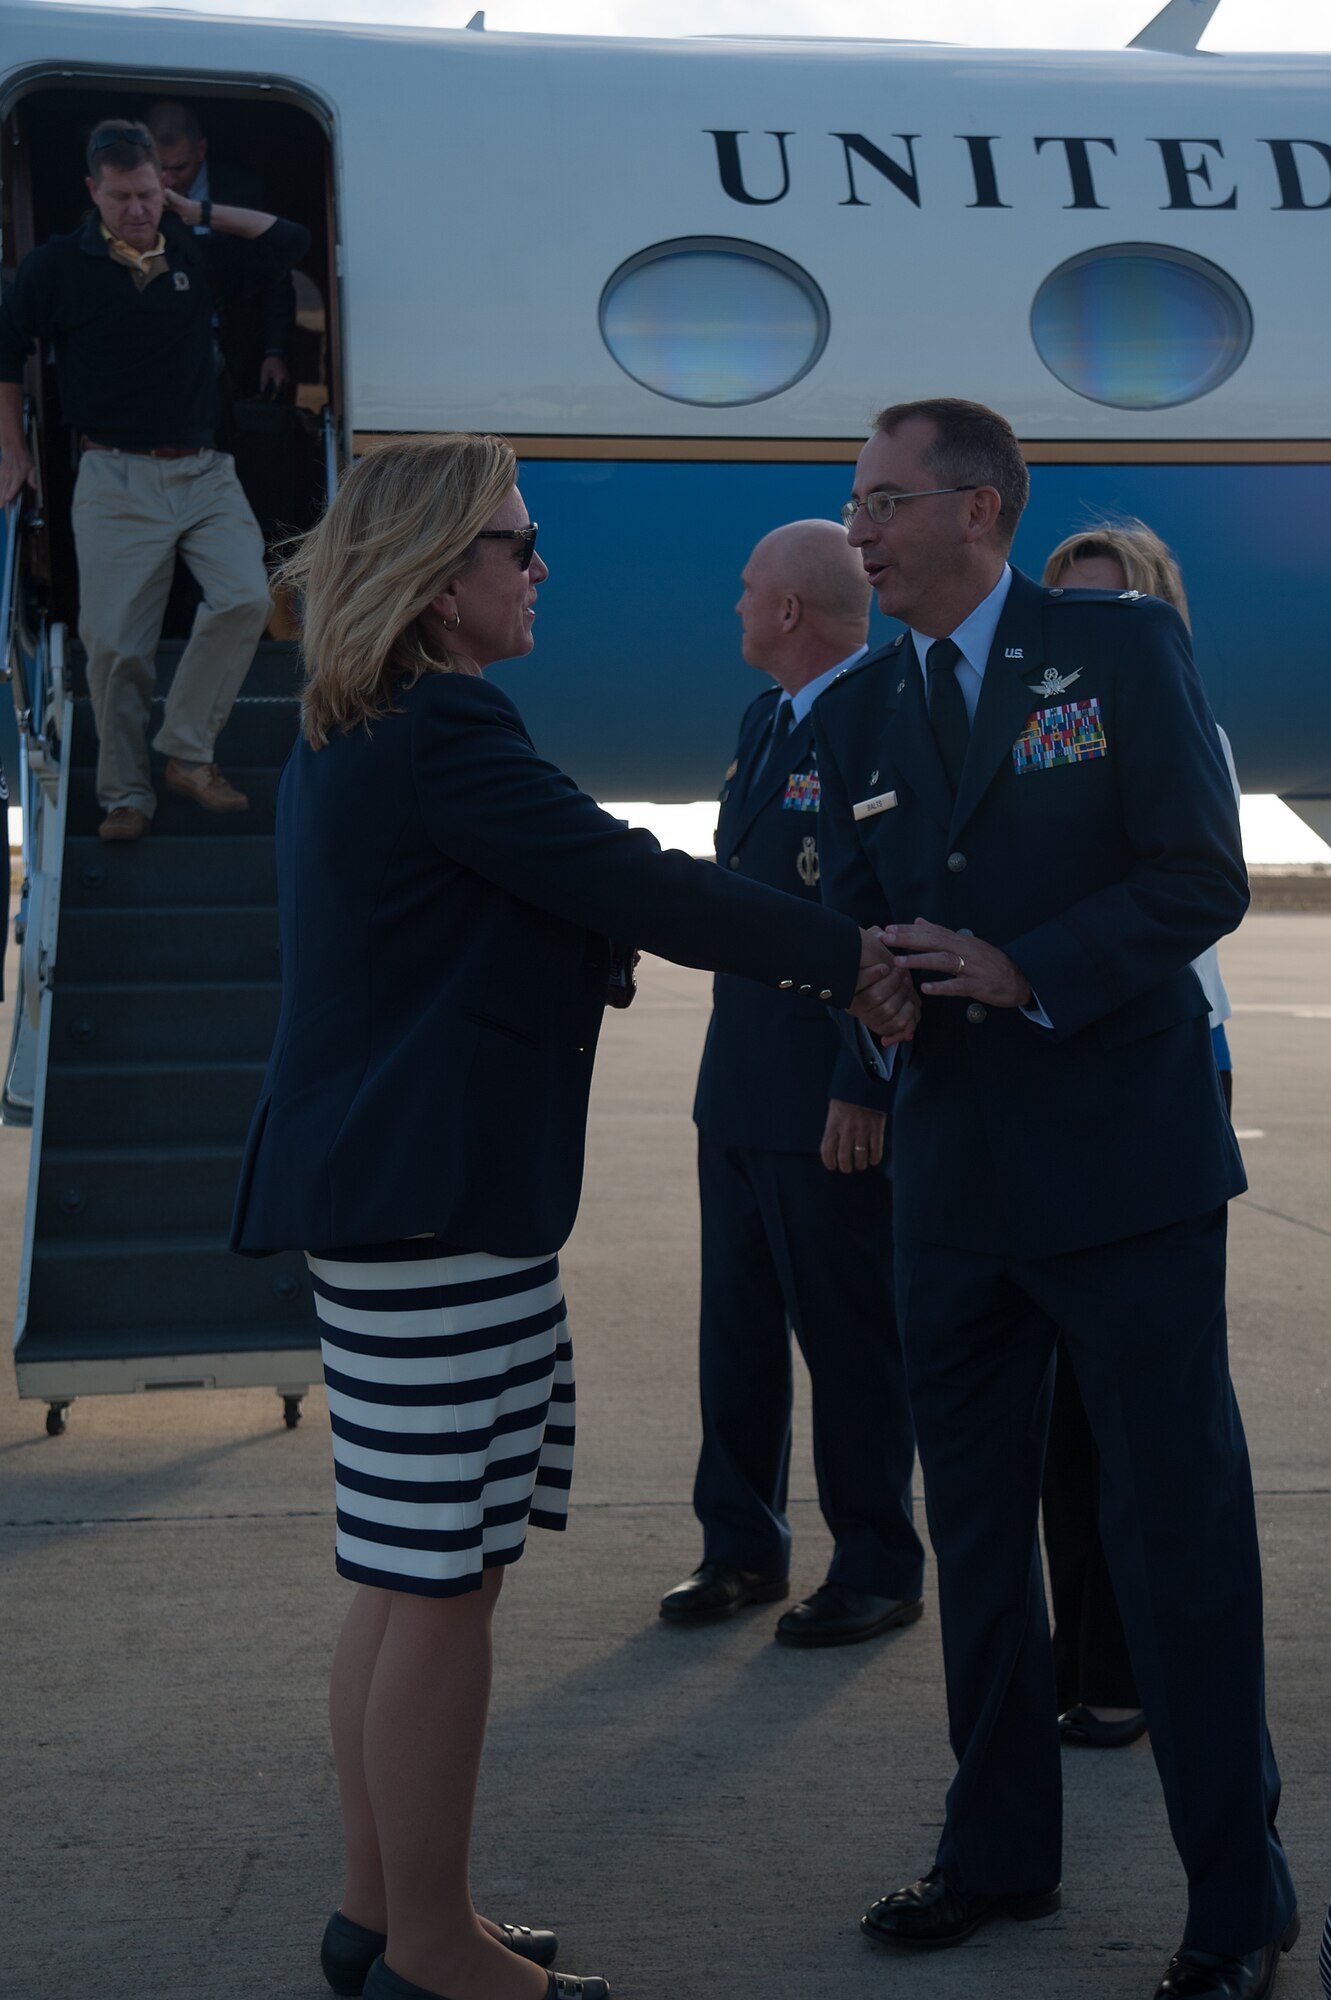 U.S. Air Force Col. Keith Balts, 30th Space Wing commander, greets the Secretary of the Air Force, Deborah Lee James during her arrival, Sept. 22, 2014, Vandenberg Air Force Base, Calif. Her three-day visit lasted from Sept. 22 through 24 and aimed to meet with Airmen as well as witness the successful launch of an unarmed, Minuteman III intercontinental ballistic missile. (U.S. Air Force photo by Airman 1st Class Ian Dudley/Released)


